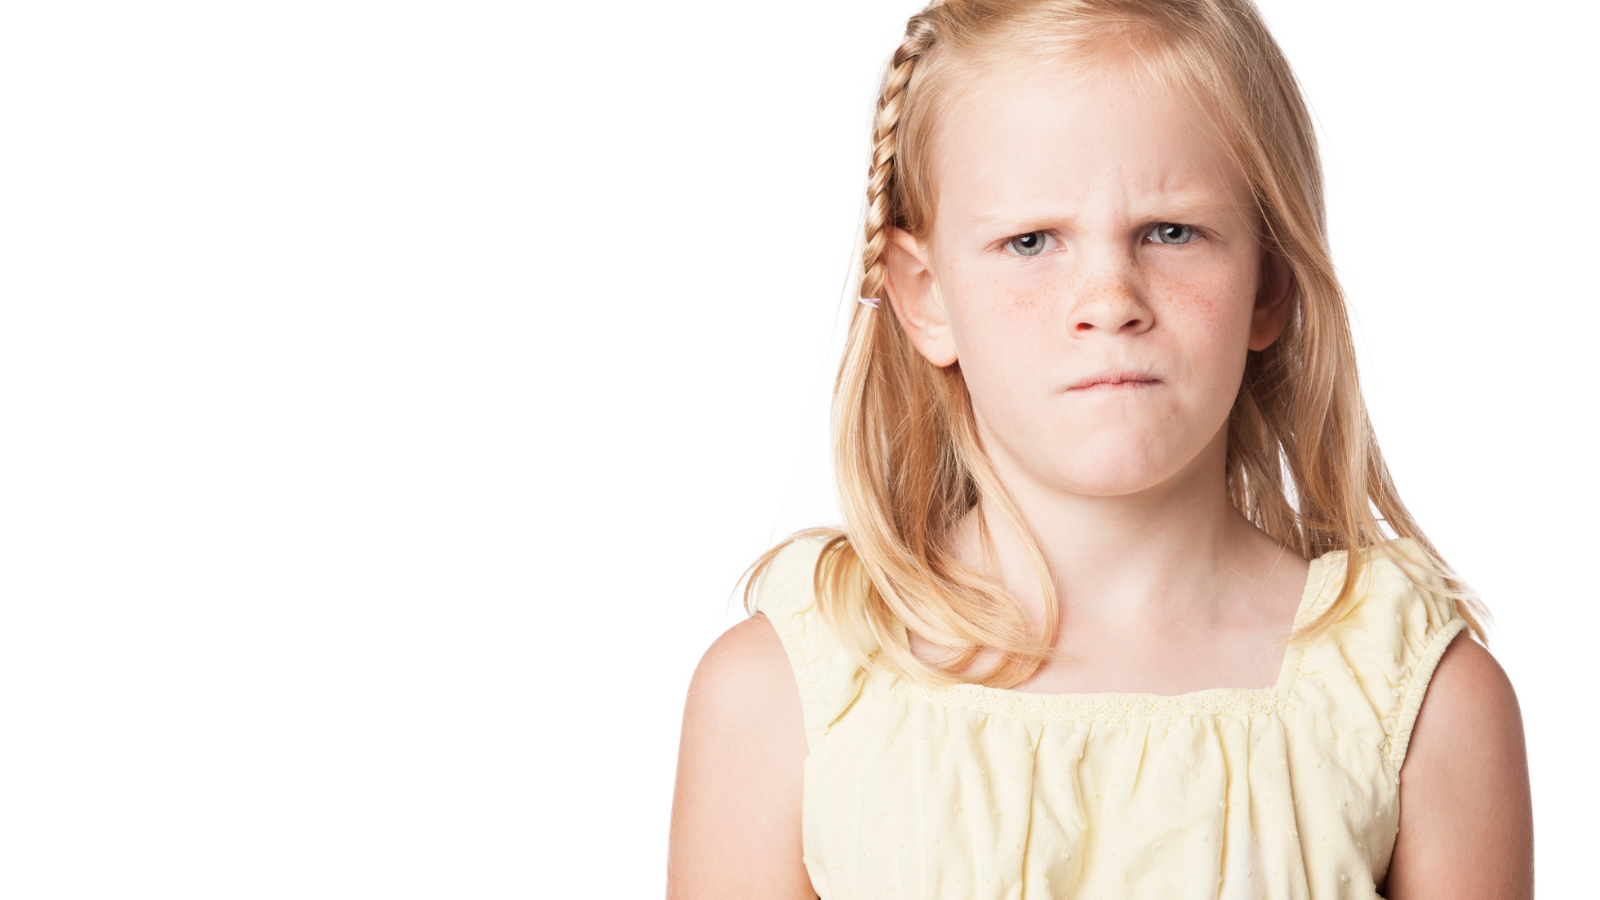 young girl with angry expression